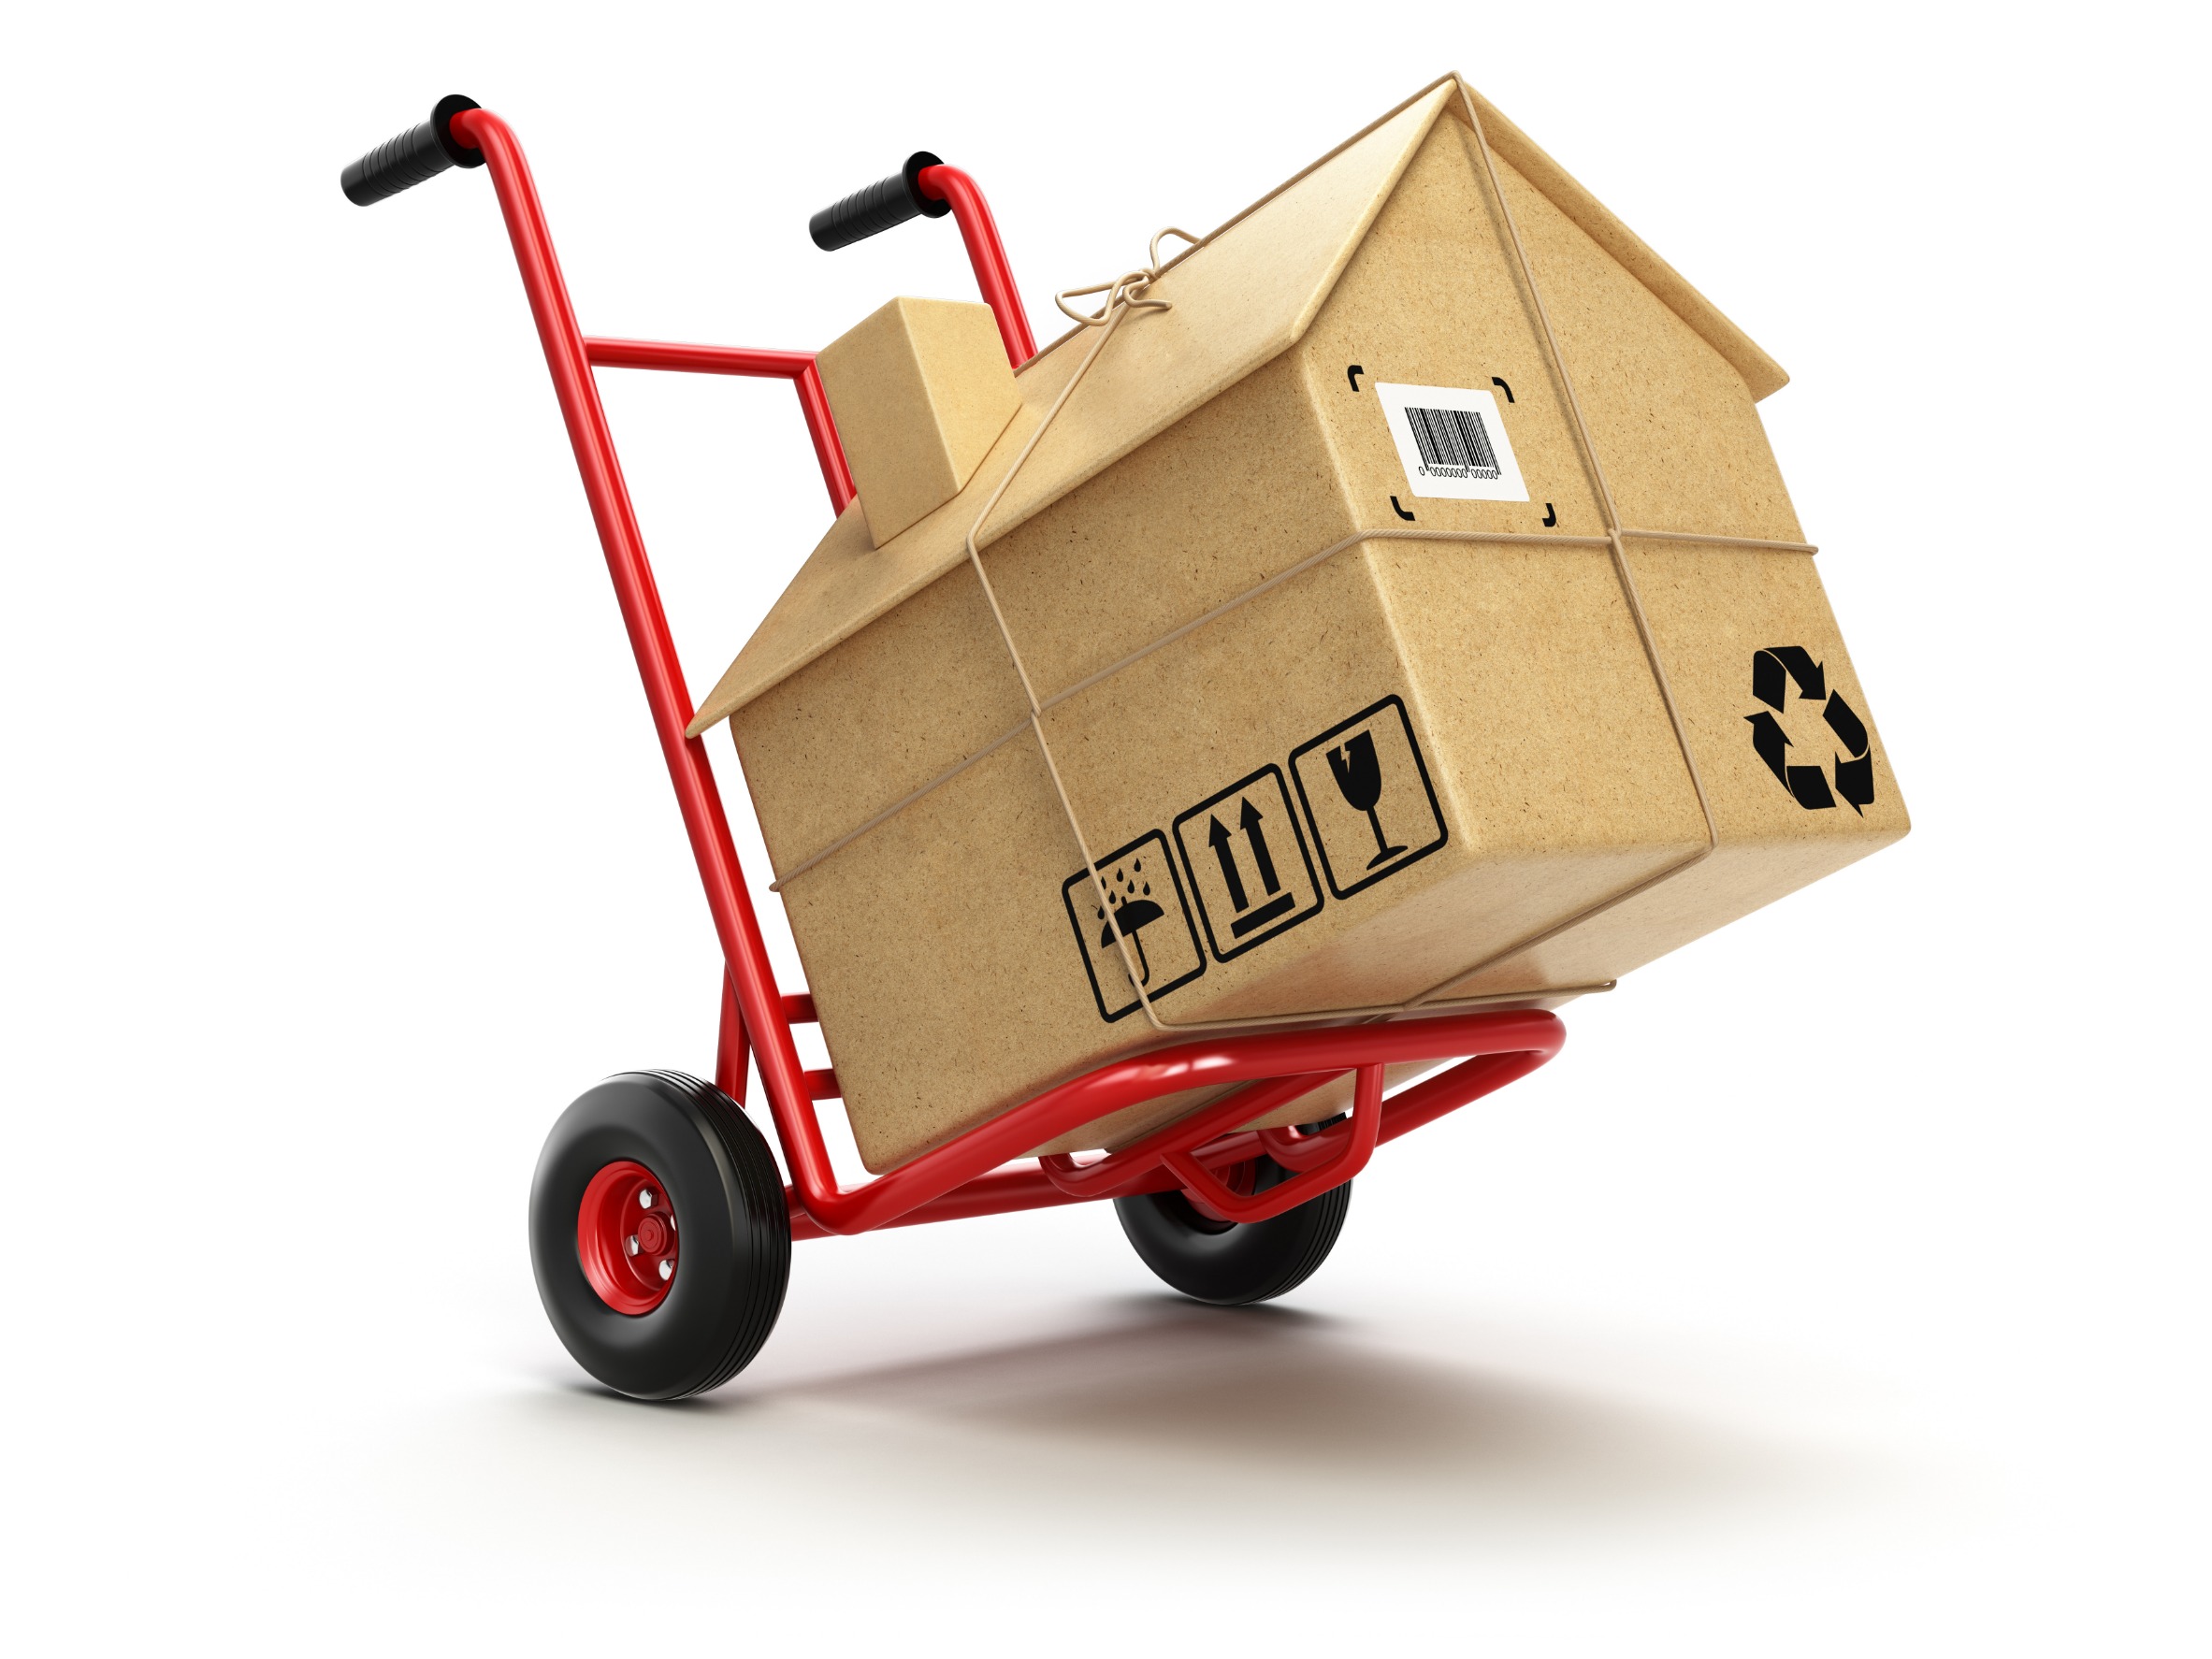 Town N Country FL Professional Moving Company